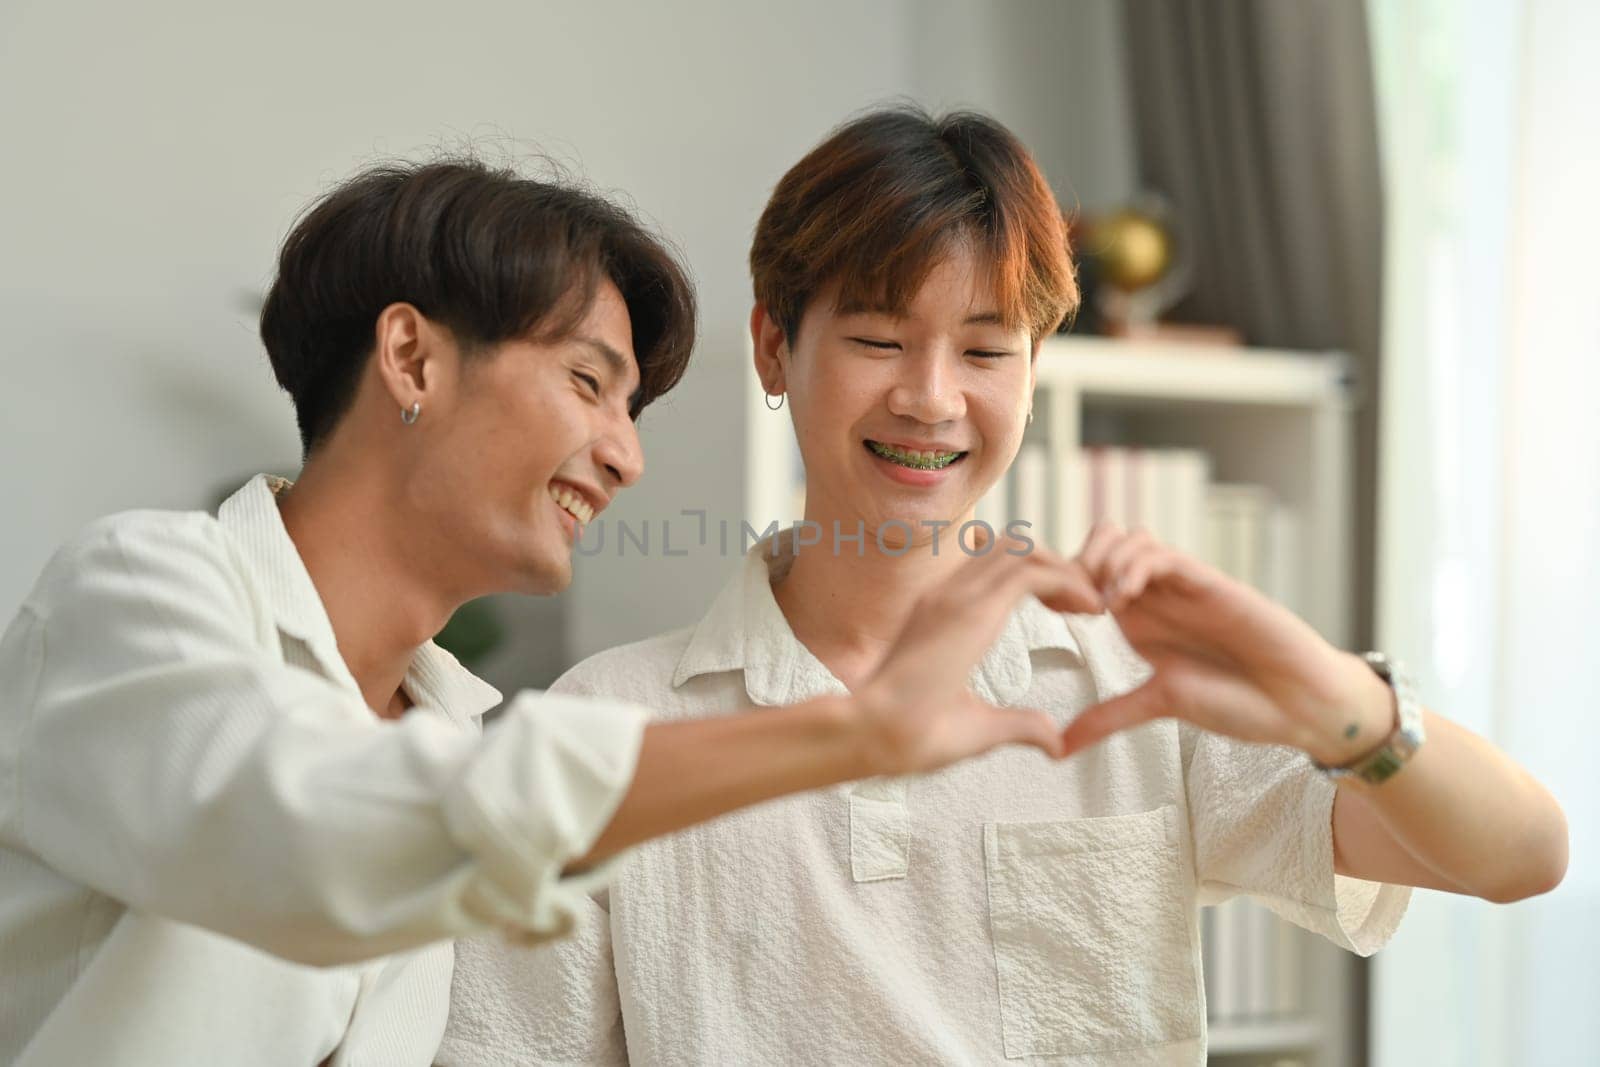 Affectionate romantic male gay couple making heart with their hands. LGBT, love and lifestyle relationship concept.